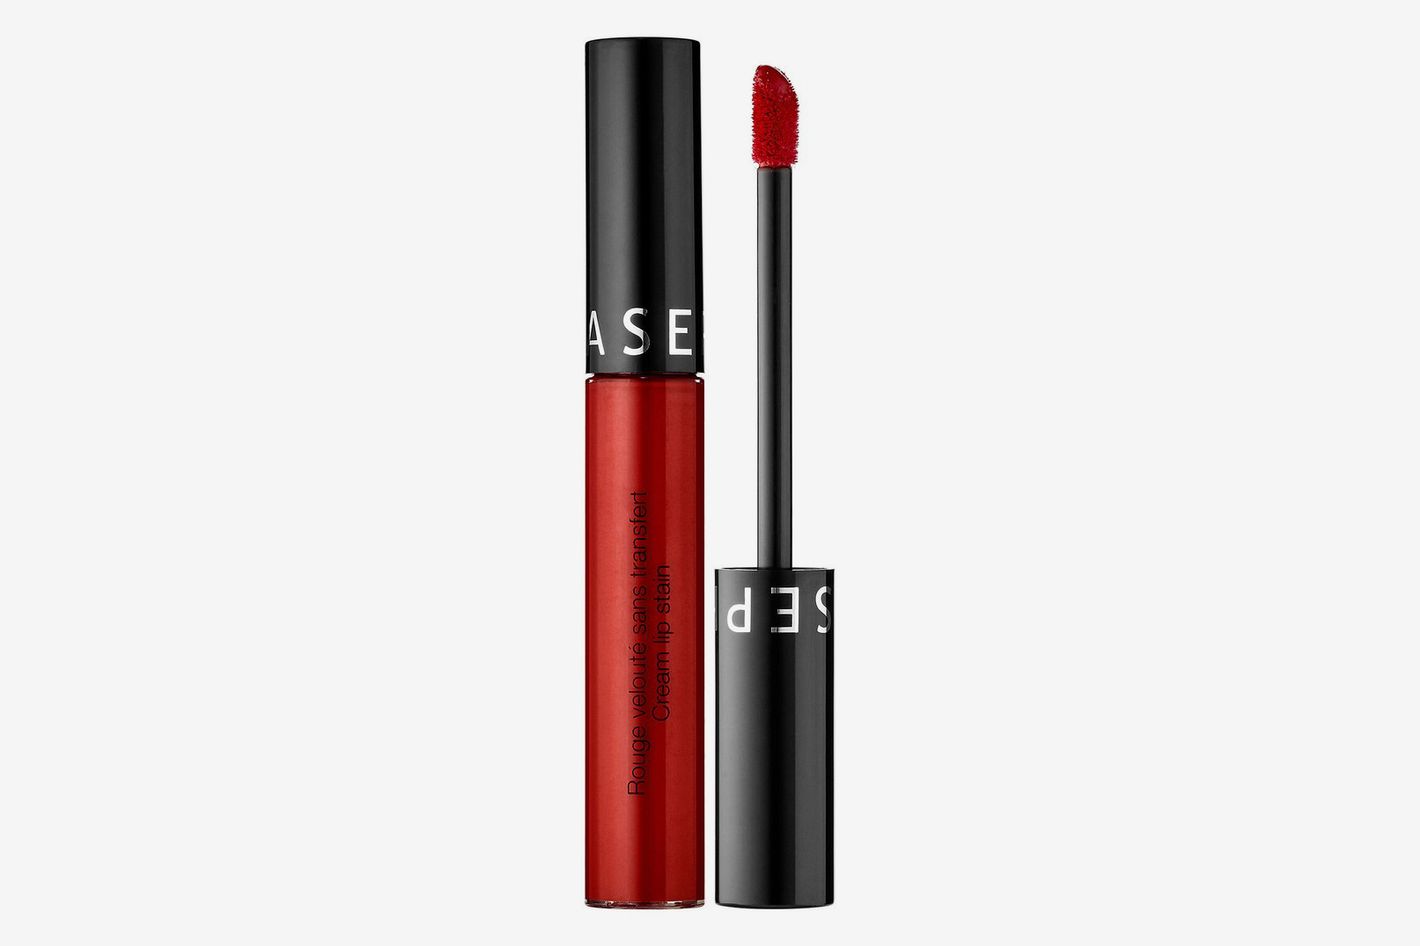 Sephora Cream Lip Stain in Always Red Review 2020